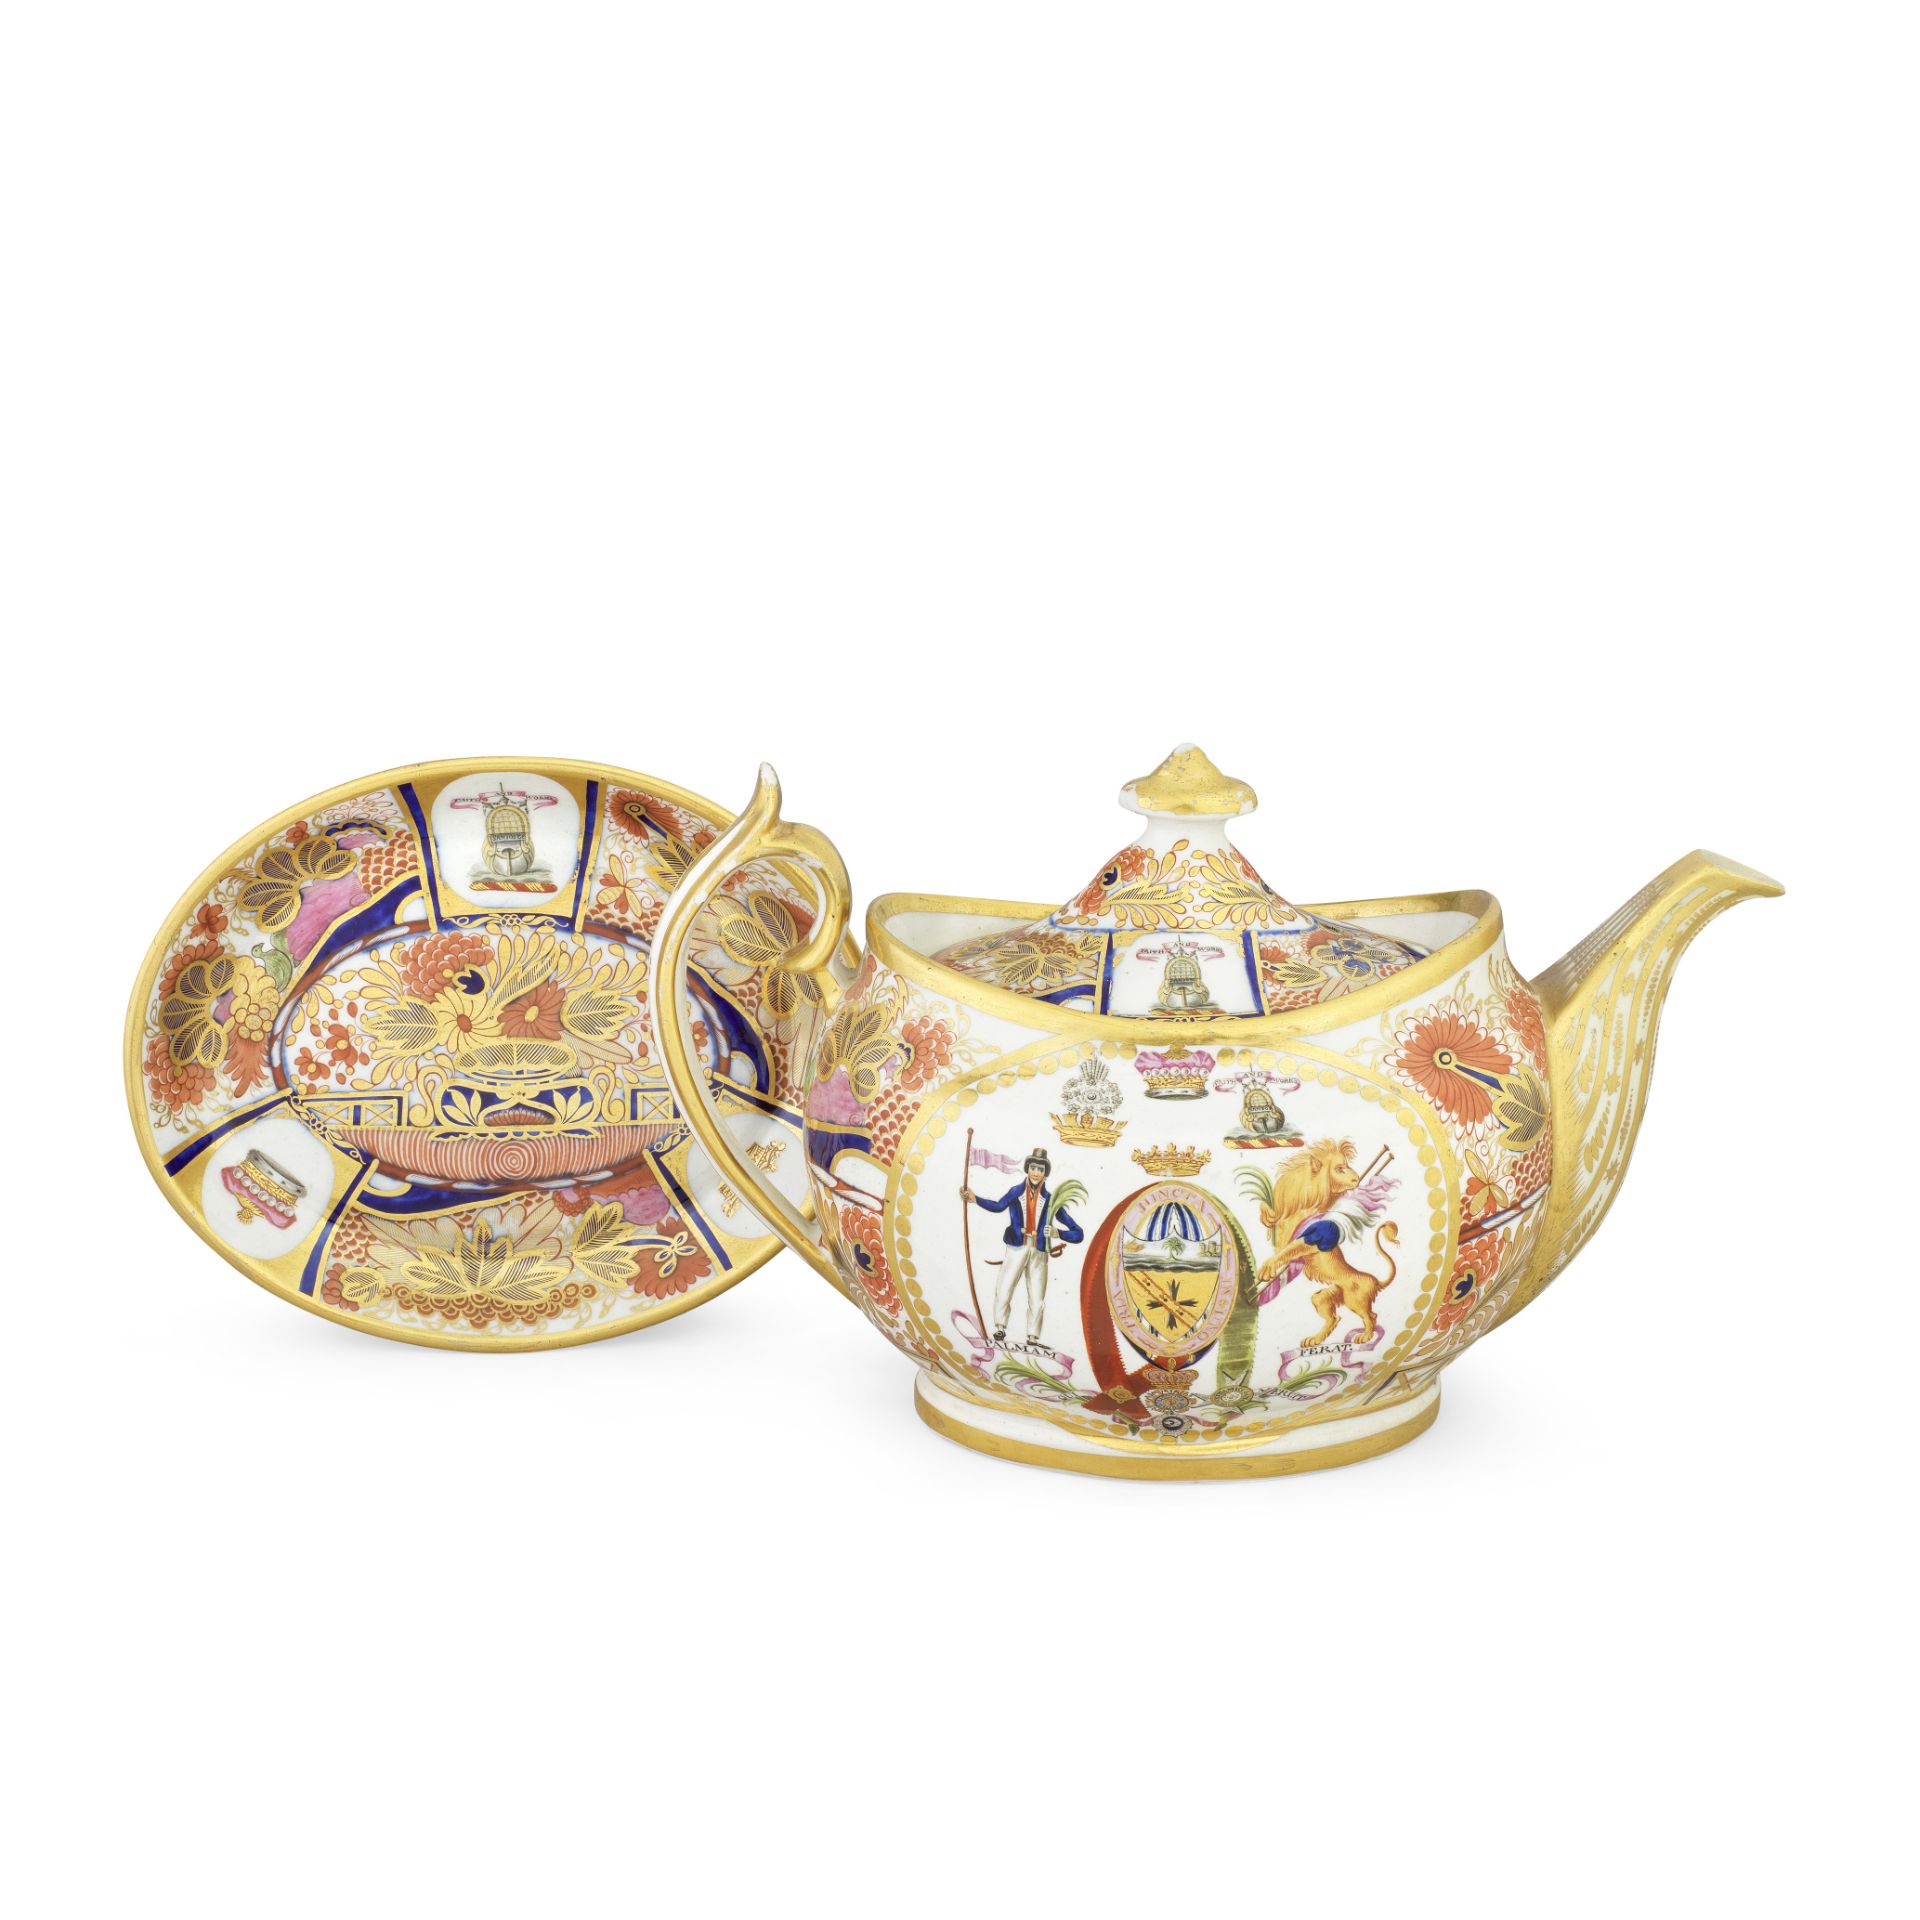 A Chamberlain Worcester teapot, cover and stand from the 'Horatia Service', circa 1802-03